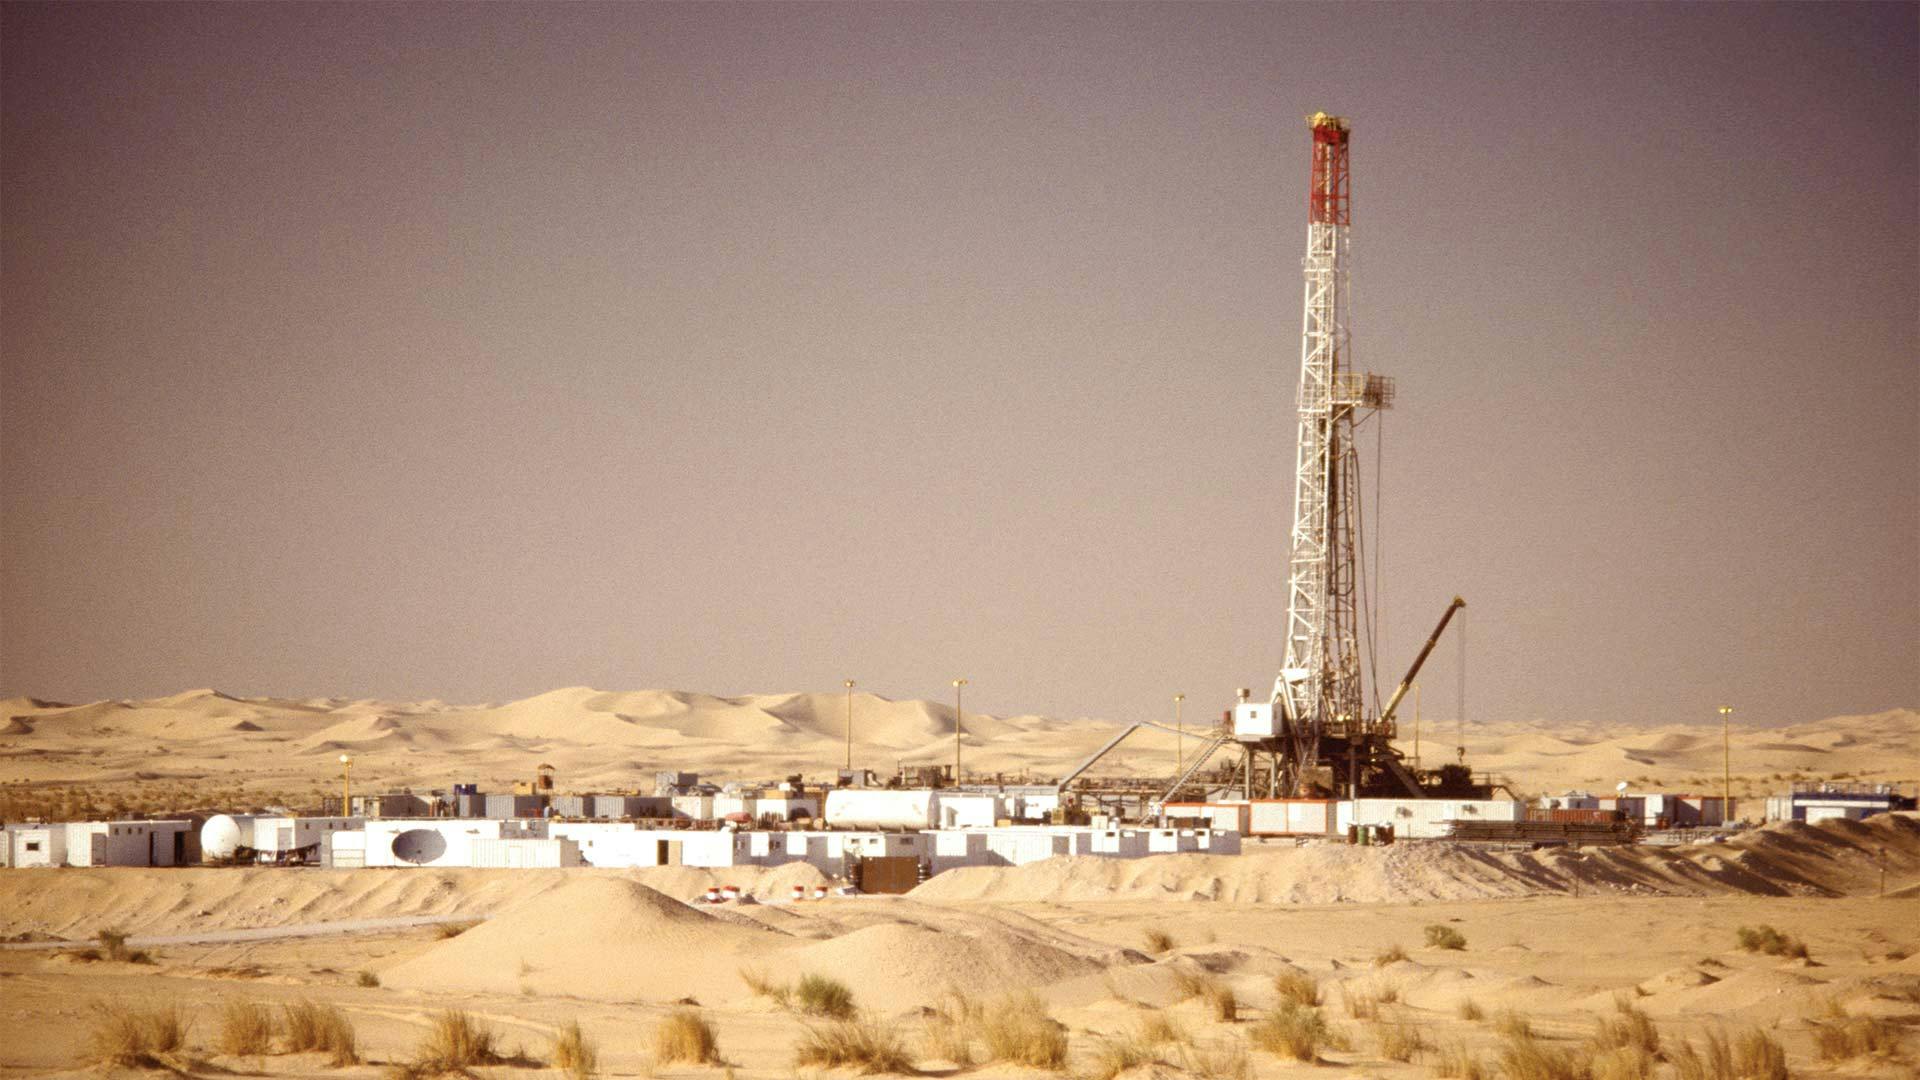 A rig set up in a desert